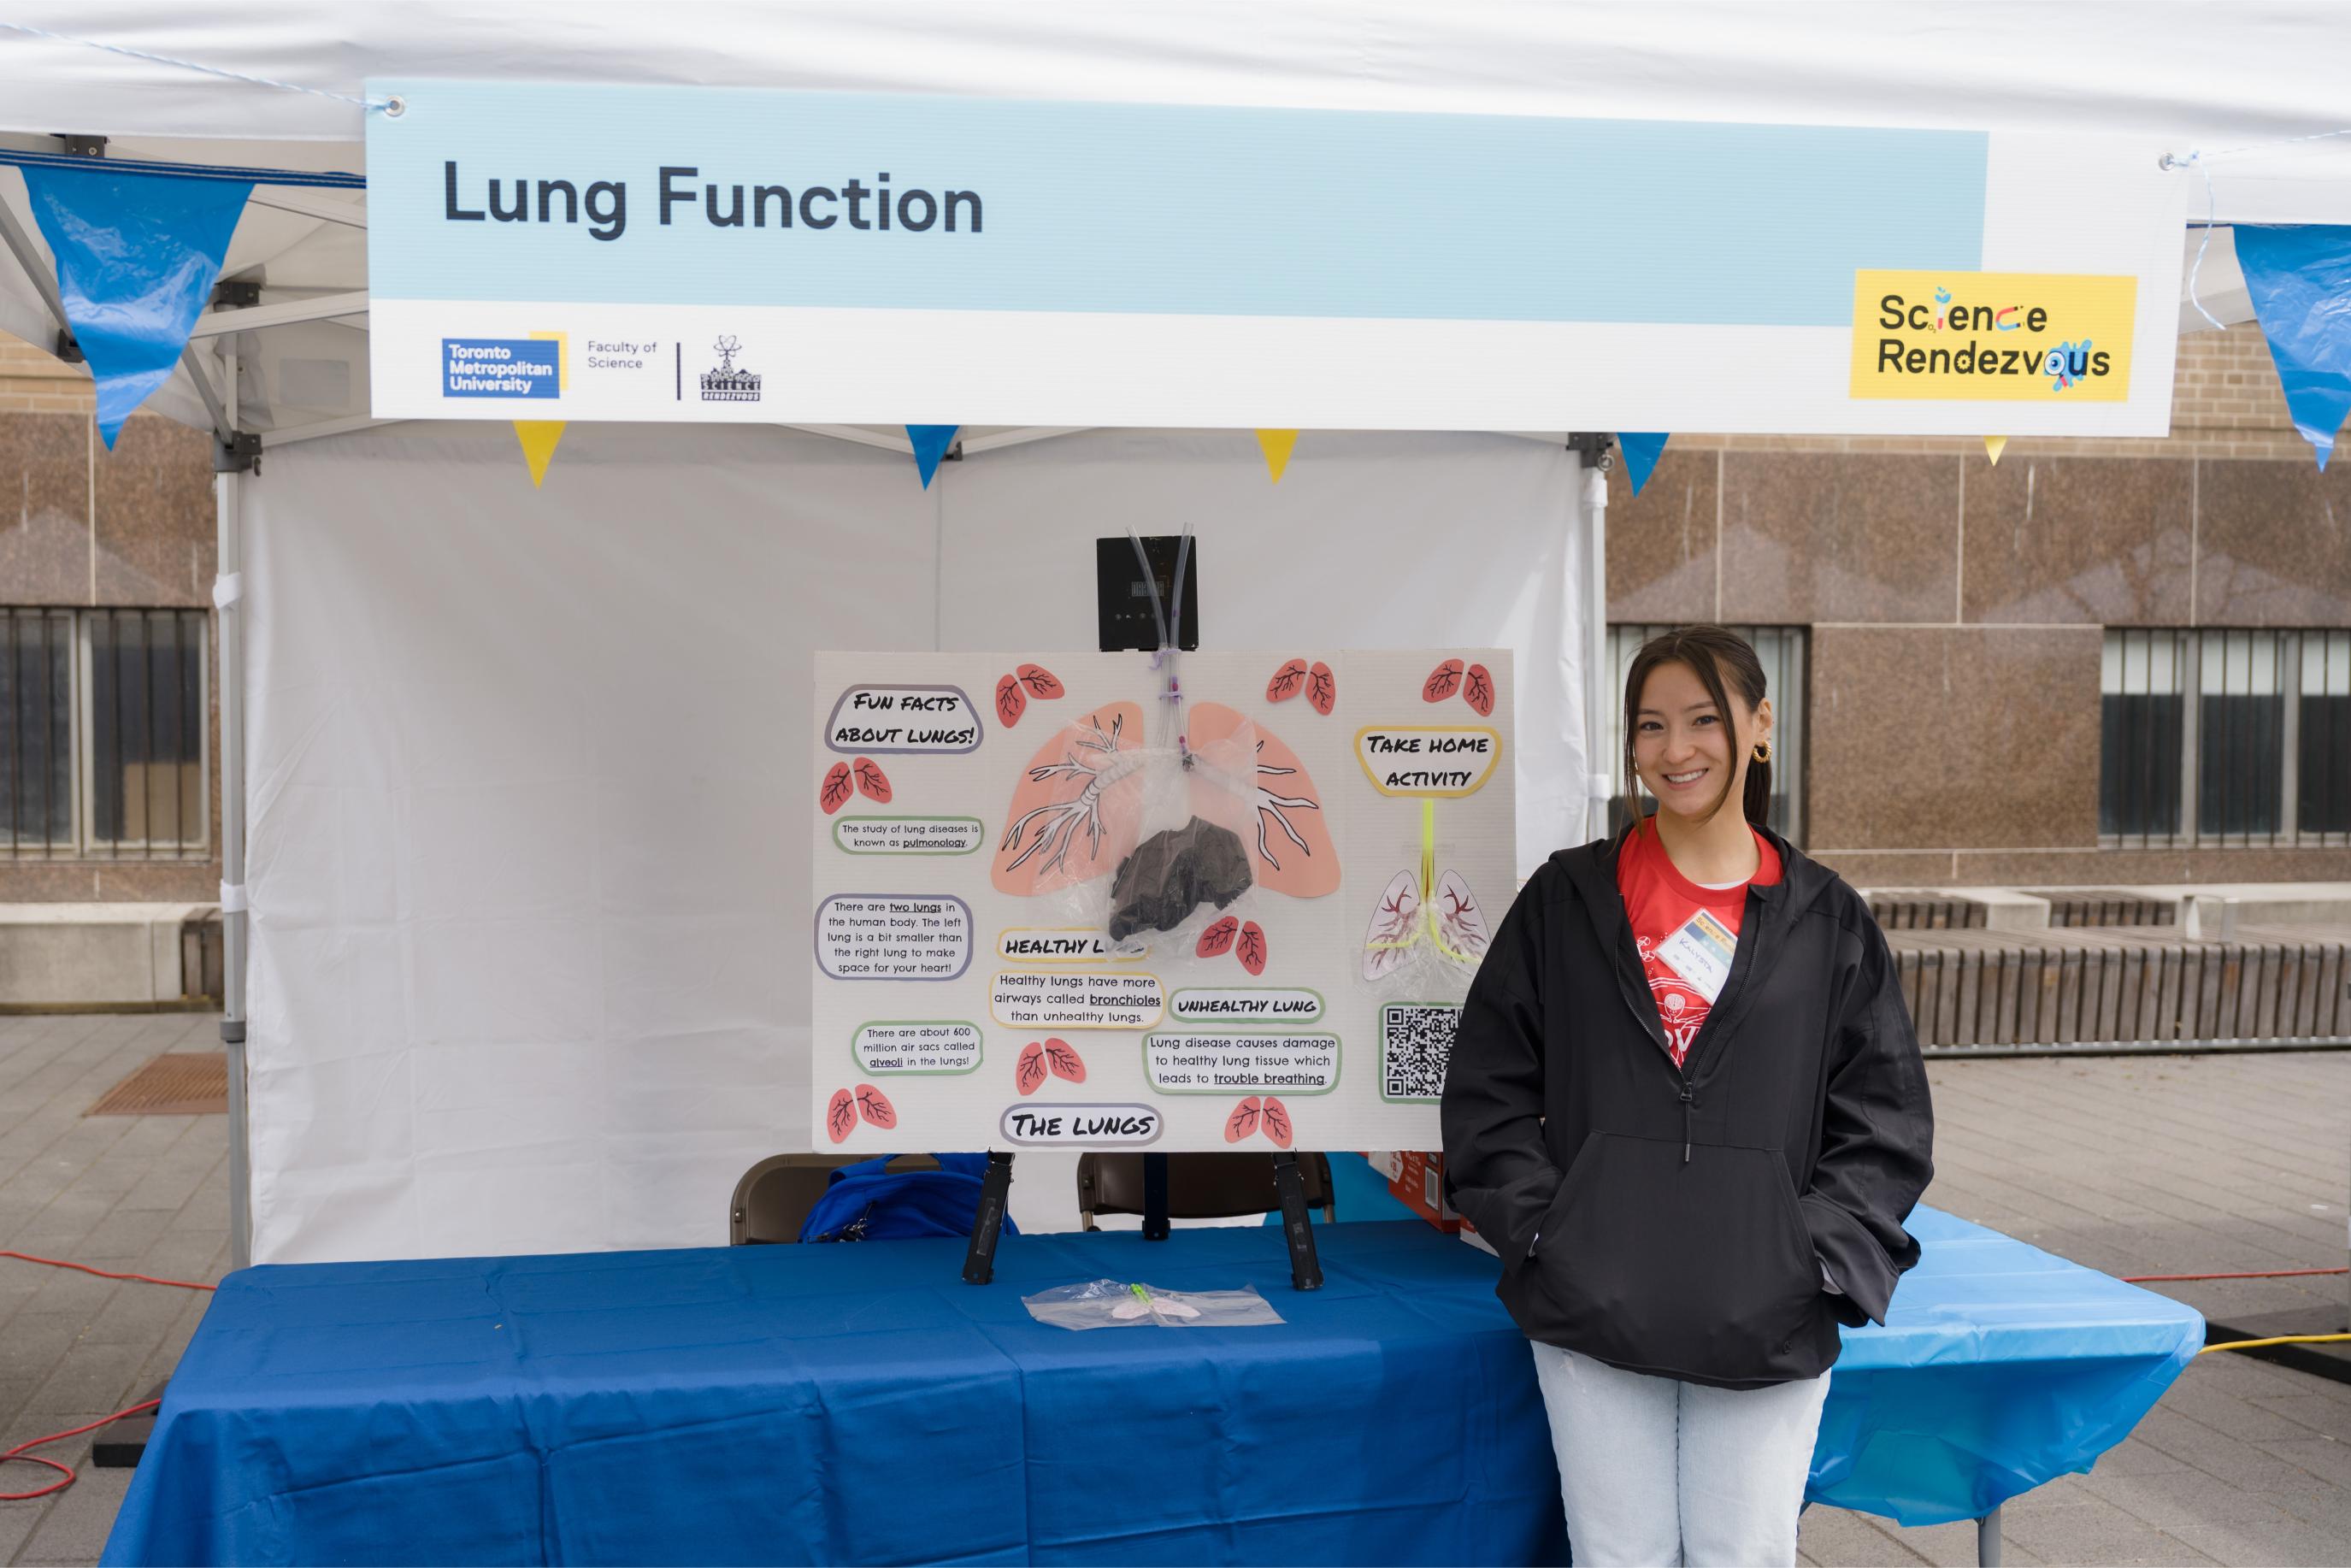 Volunteer posing at the Lung Function Booth